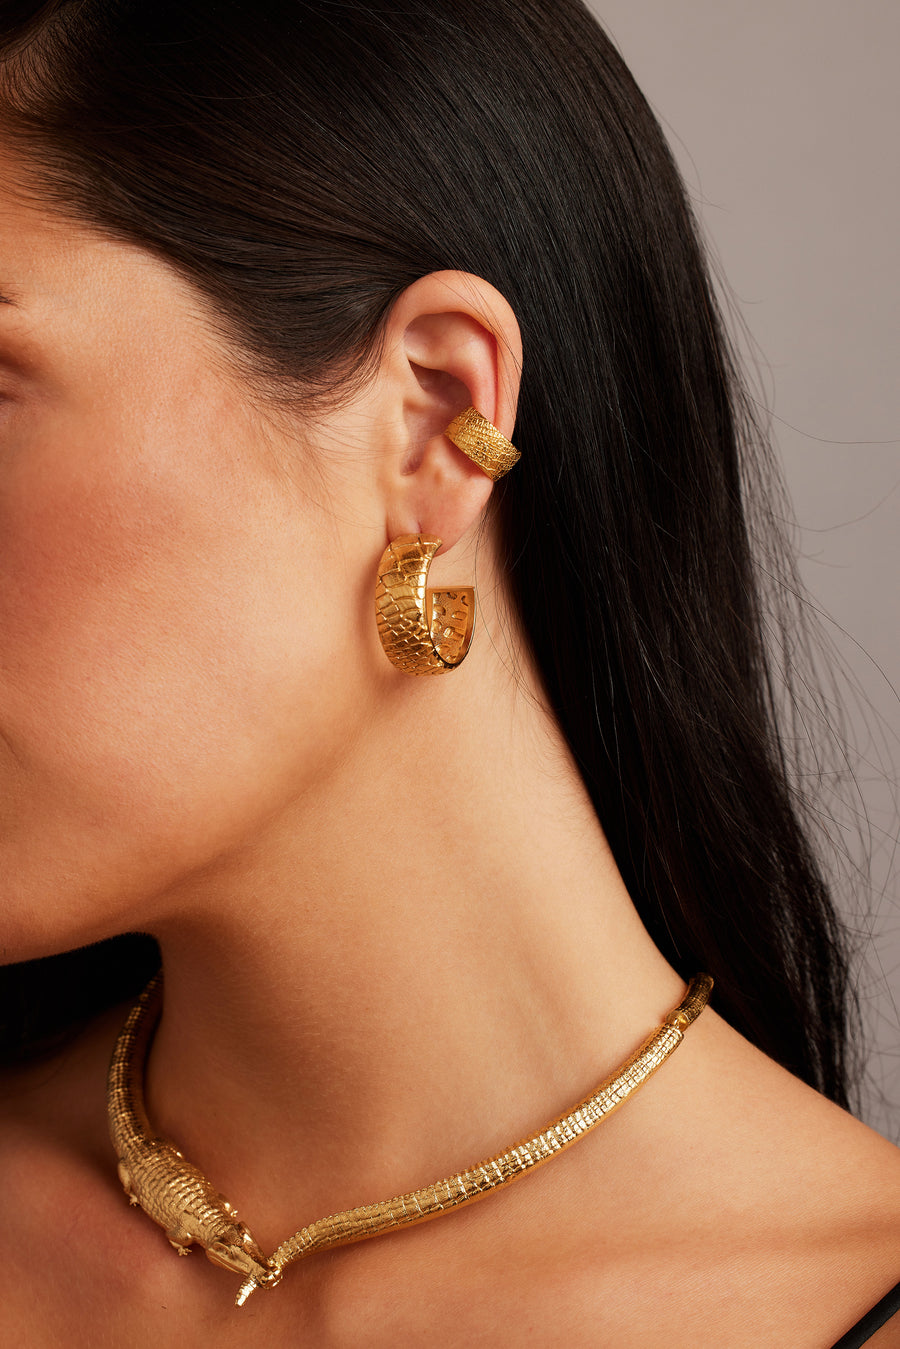 Woman wearing the Desert Darling Earrings in gold, paired with the Croc Kingdom Collar and Desert Darling Ear Cuff